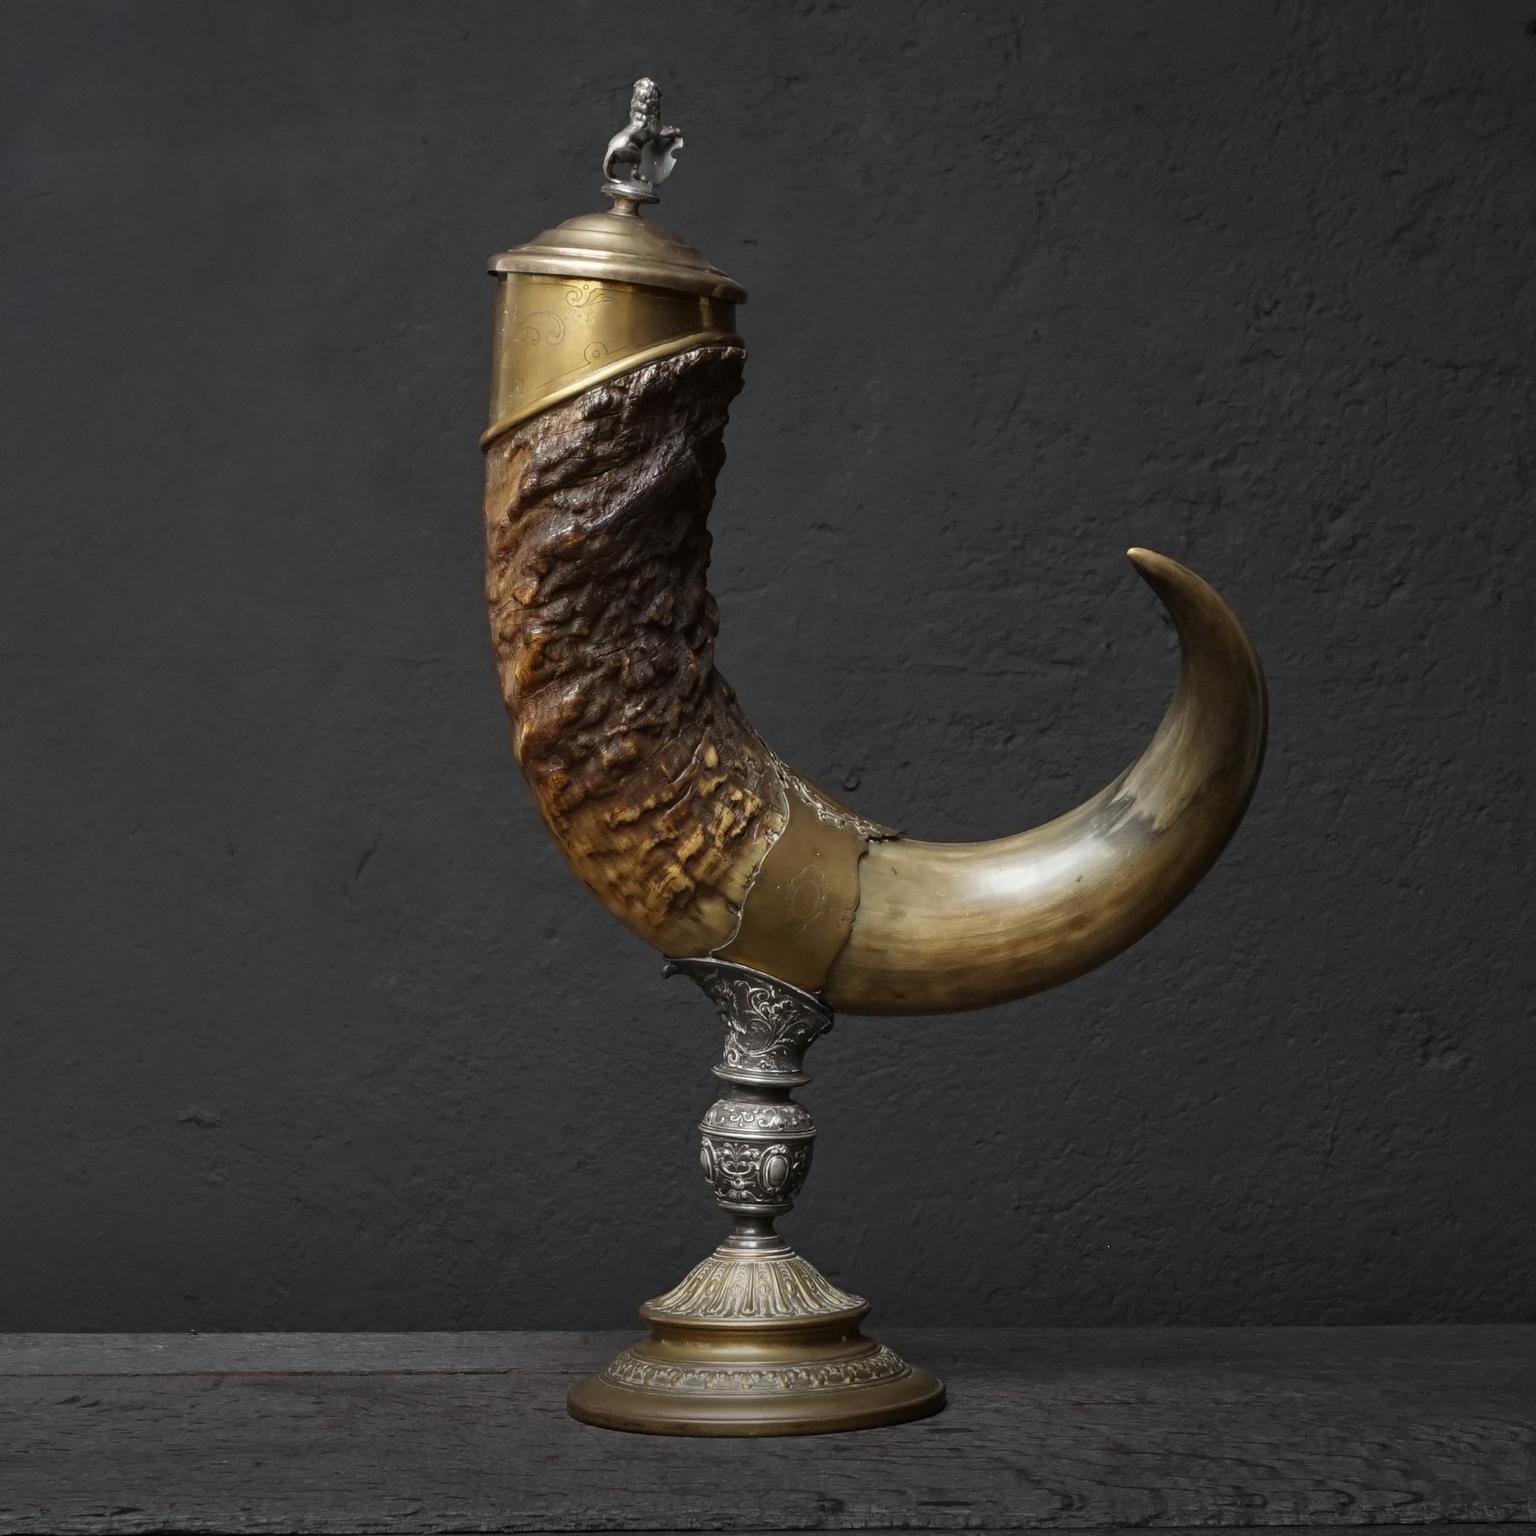 A very large drinking horn or 'Horn of plenty' made of Indian Water buffalo Horn, mounted in silver plated copper and metal, plated copper cover with on top a lion holding a coat of arms.
Very elaborated decorative engraving and embossing on the